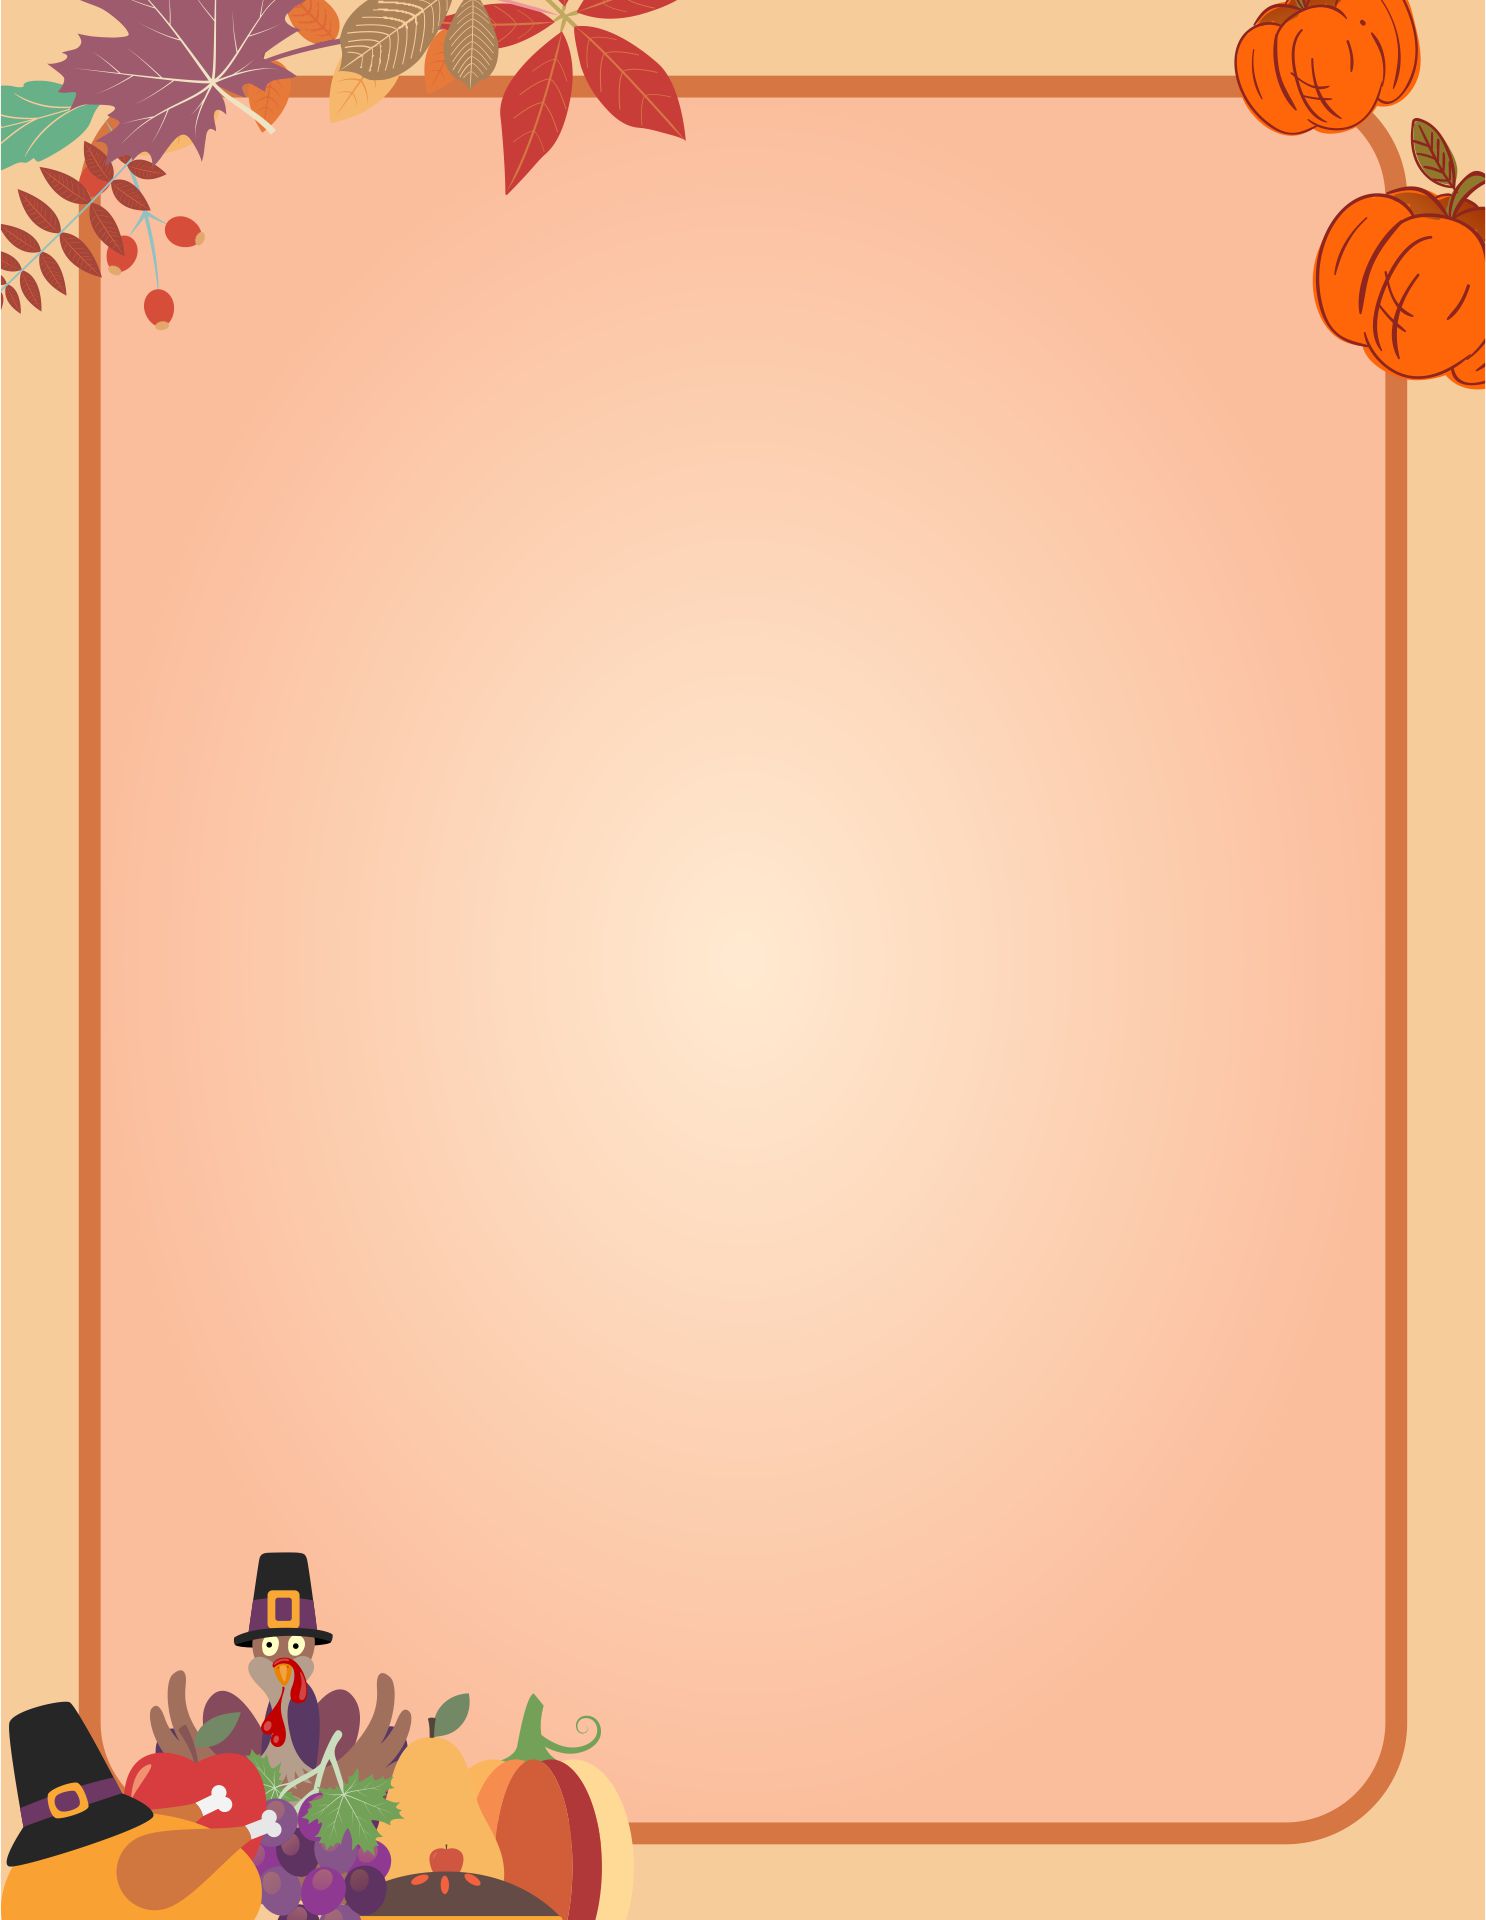 6 Best Images of Free Printable Thanksgiving Letter Head Free